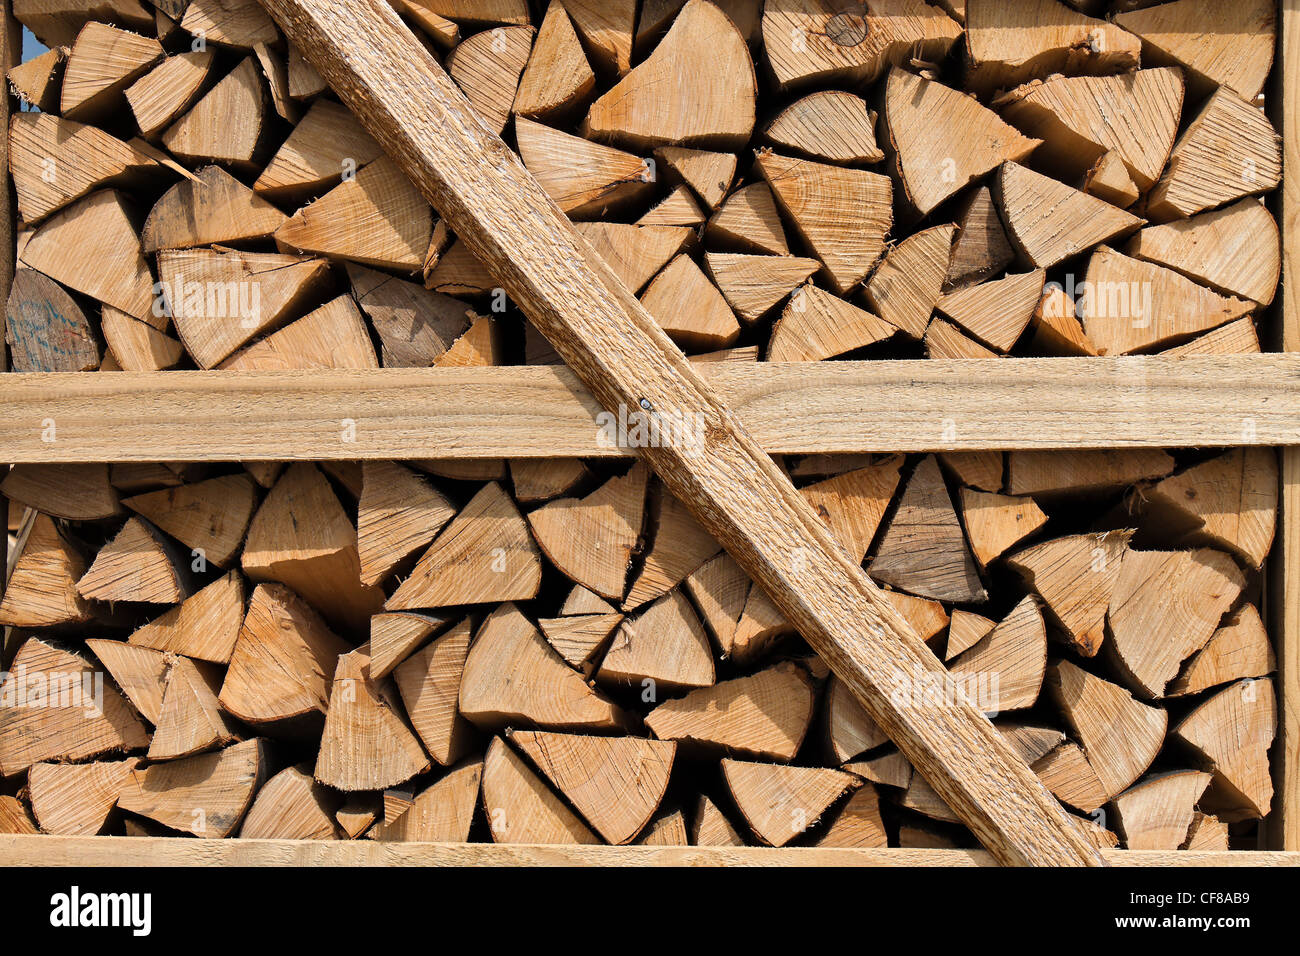 a large pile of wood for firewood Stock Photo